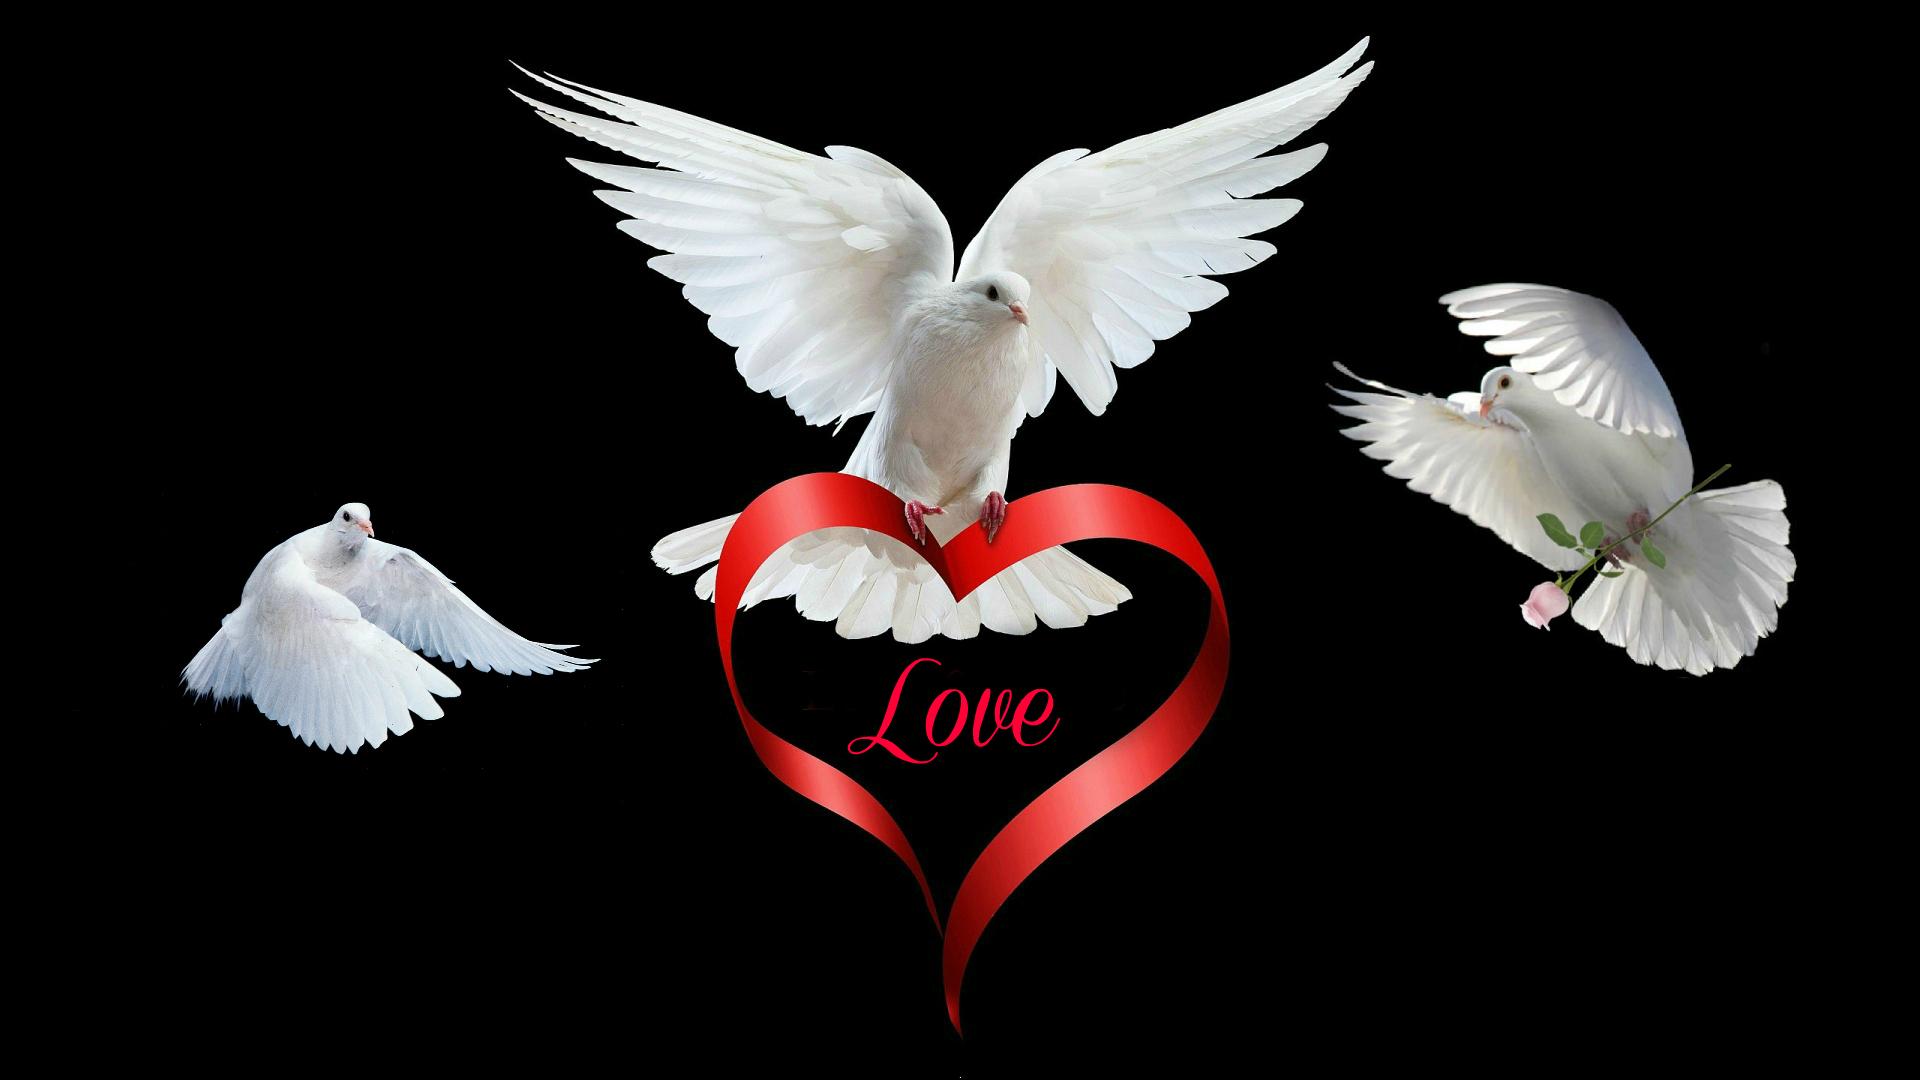 Download Bird love valentines day special HD wallpaper and emotion for your mobile cell phone